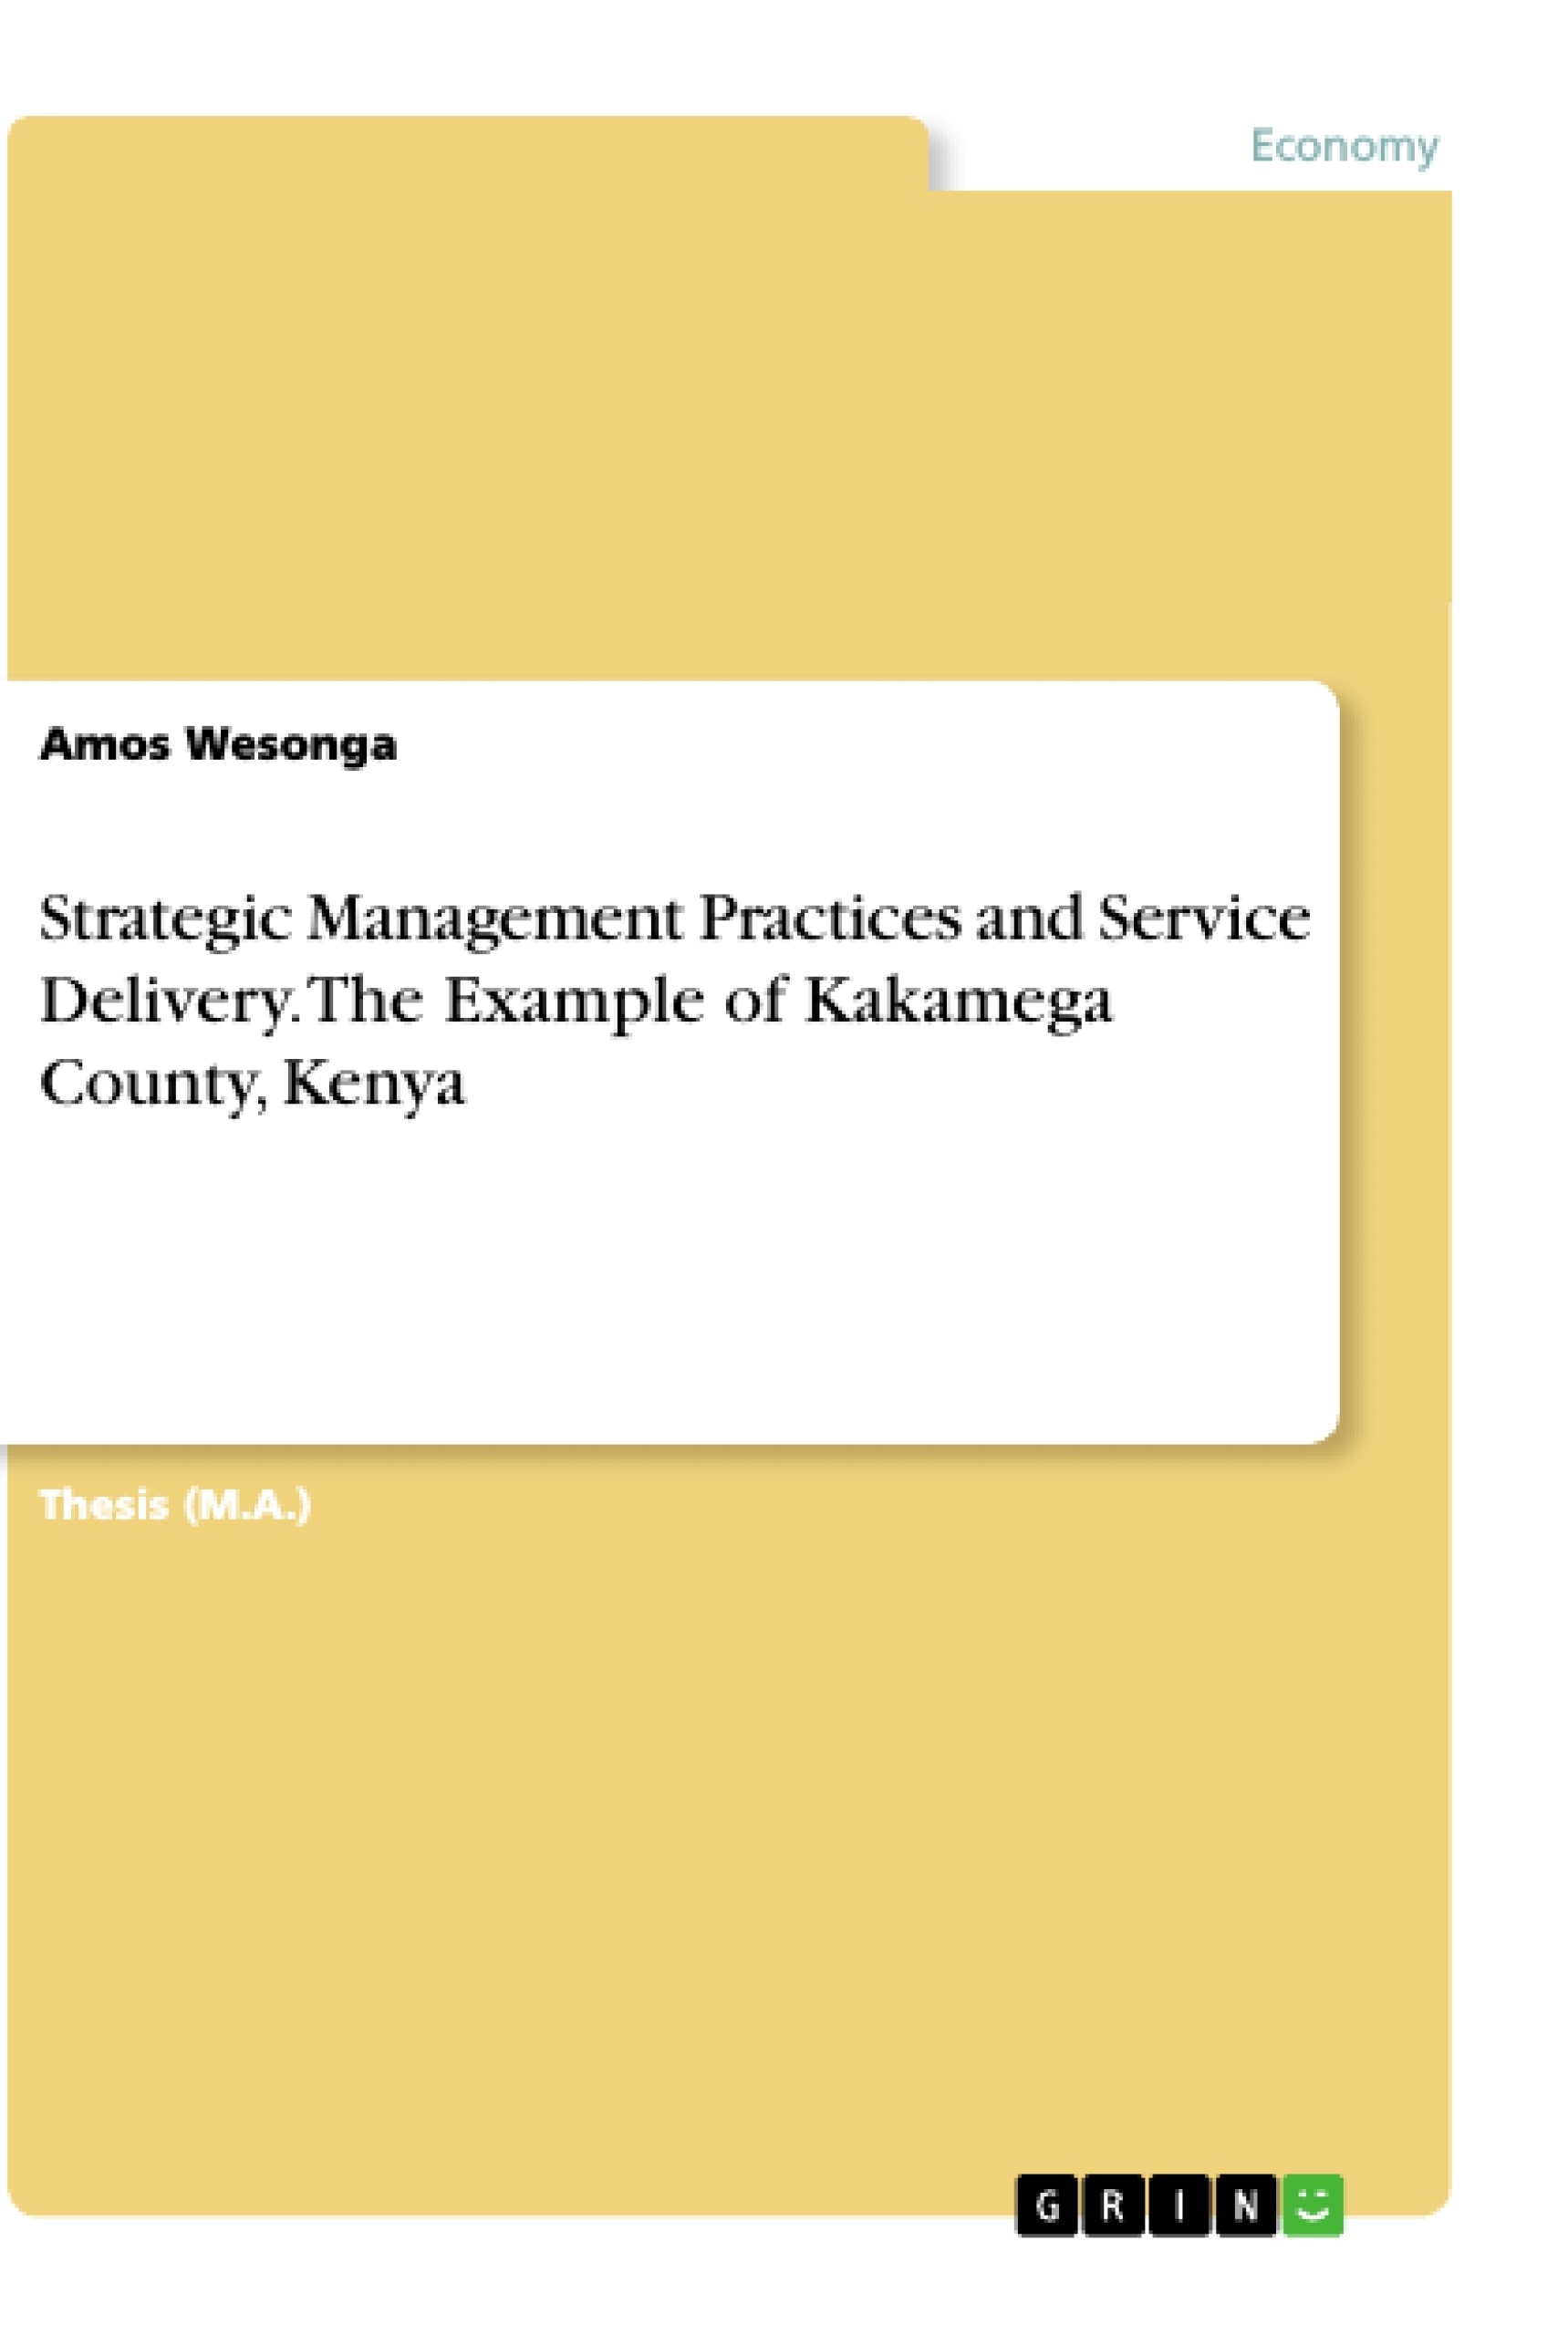 Título: Strategic Management Practices and Service Delivery. The Example of Kakamega County, Kenya